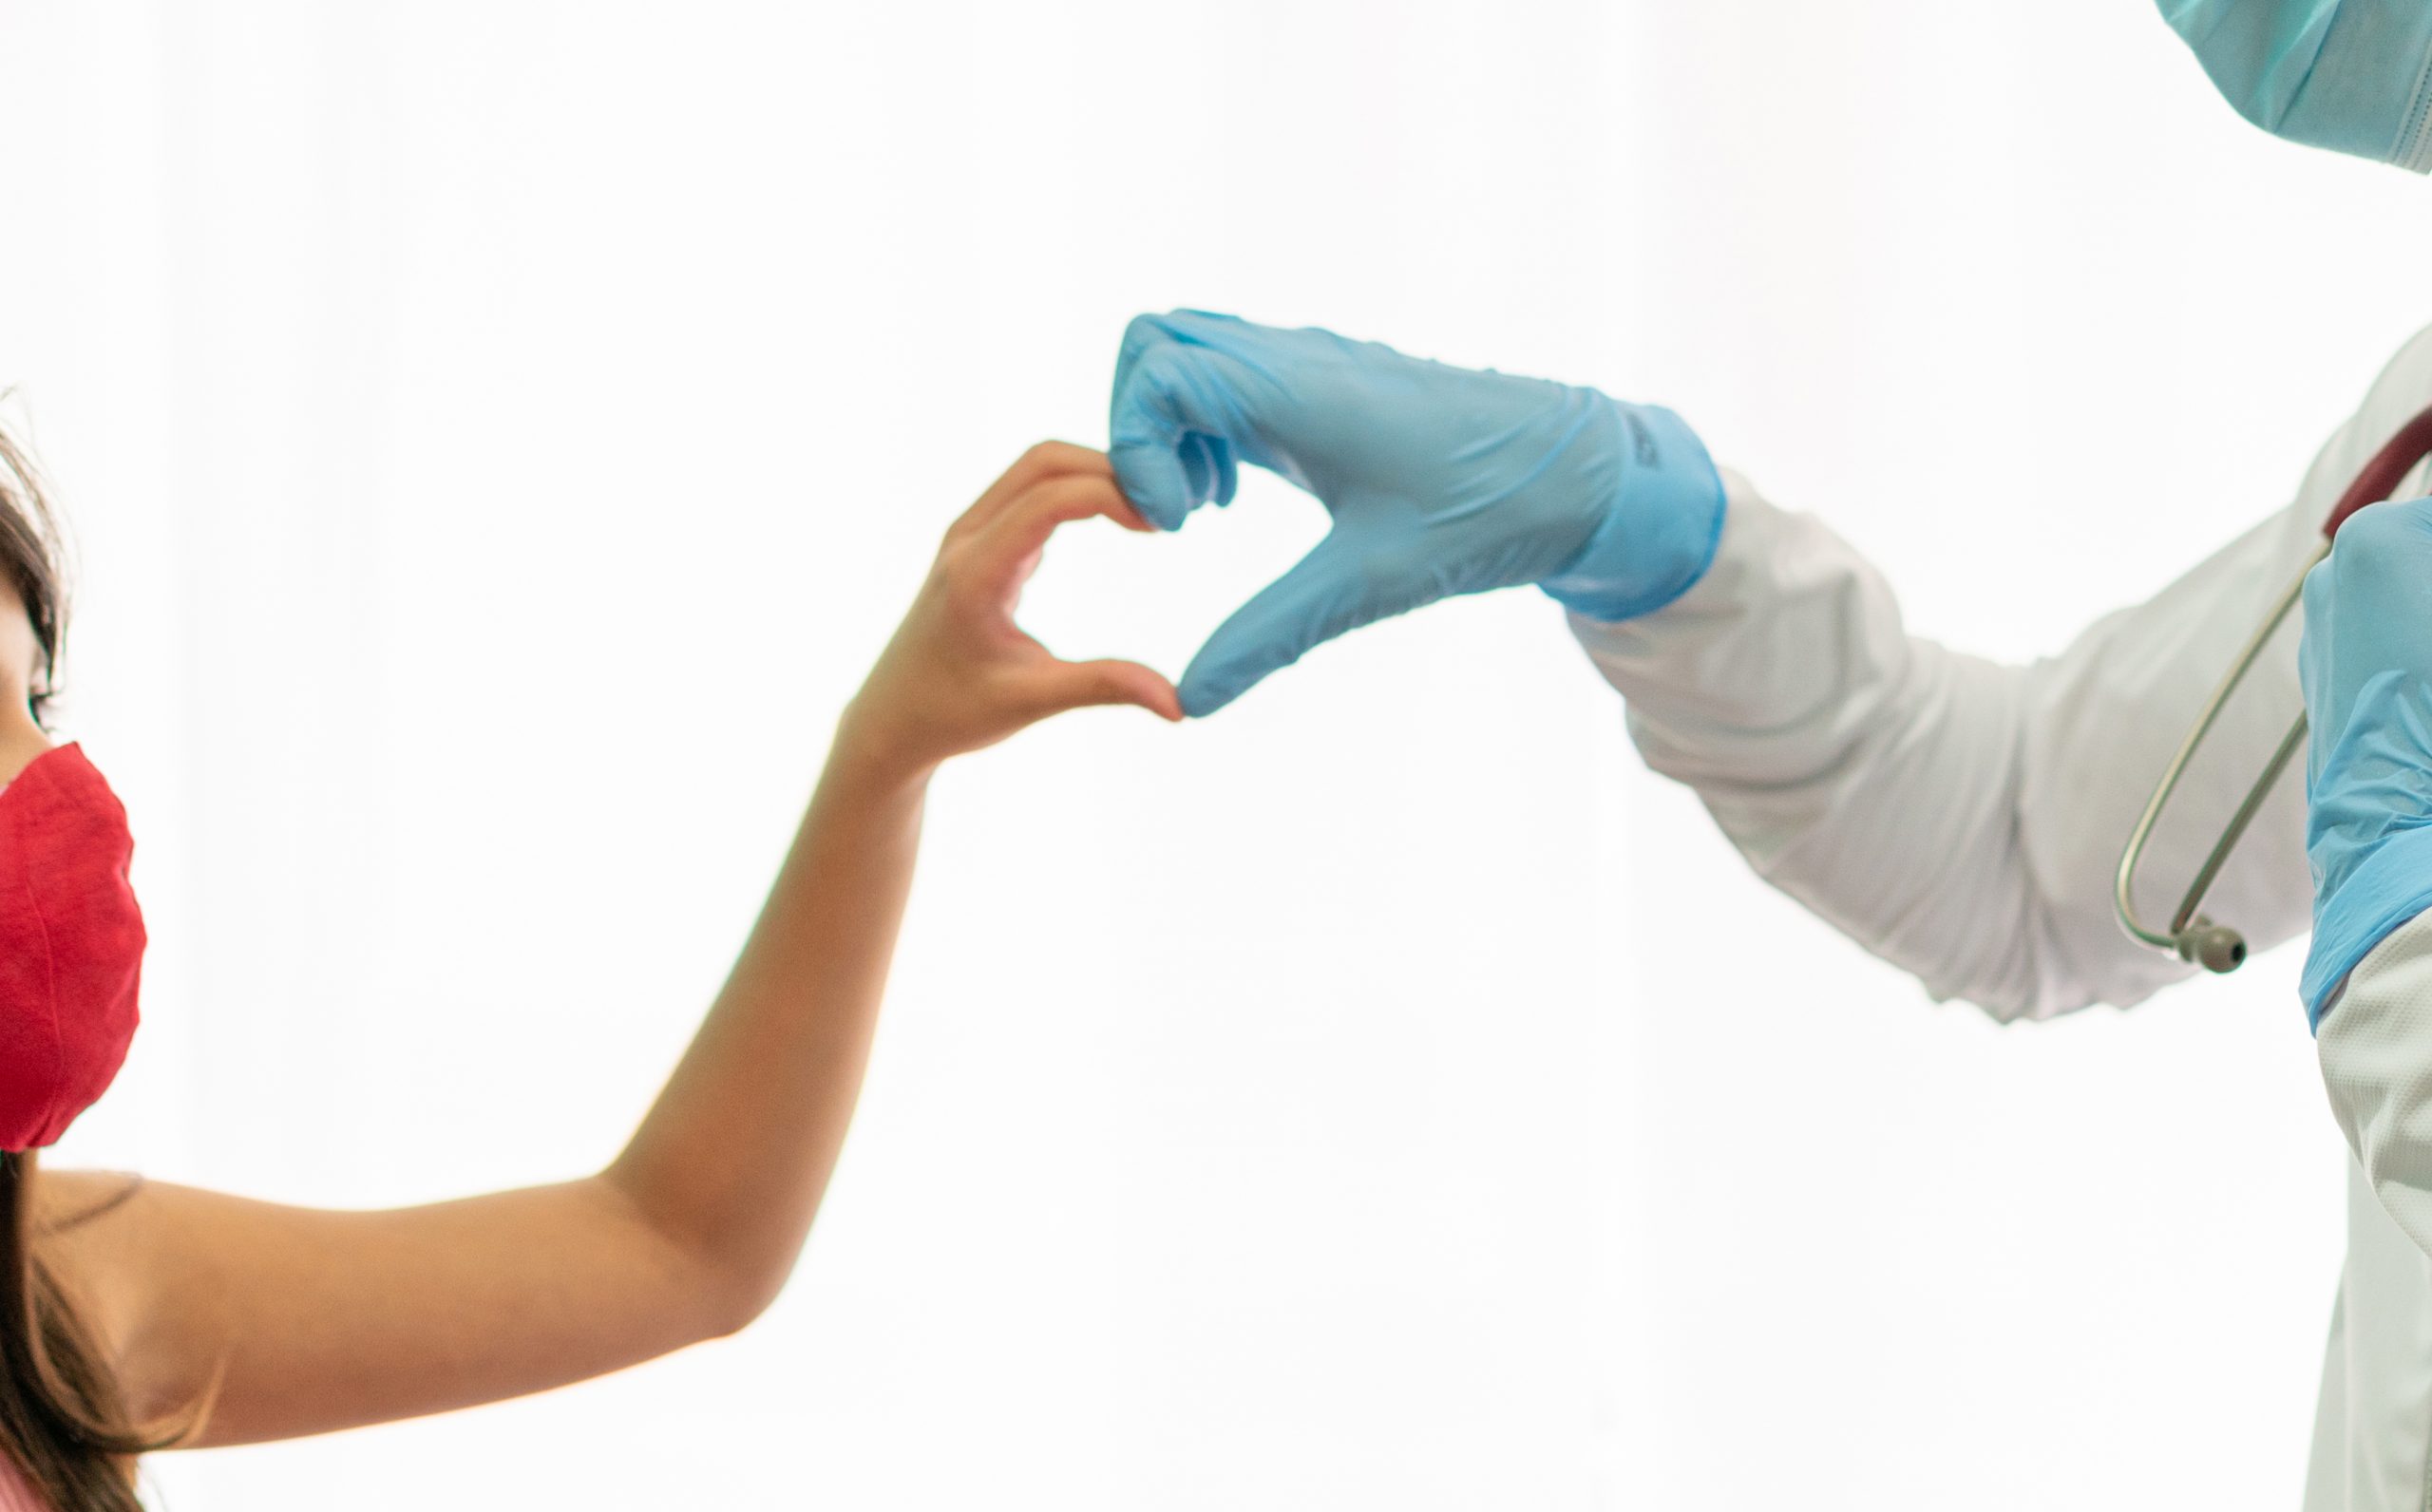 Close up shot of physician and child making a heart with their hands